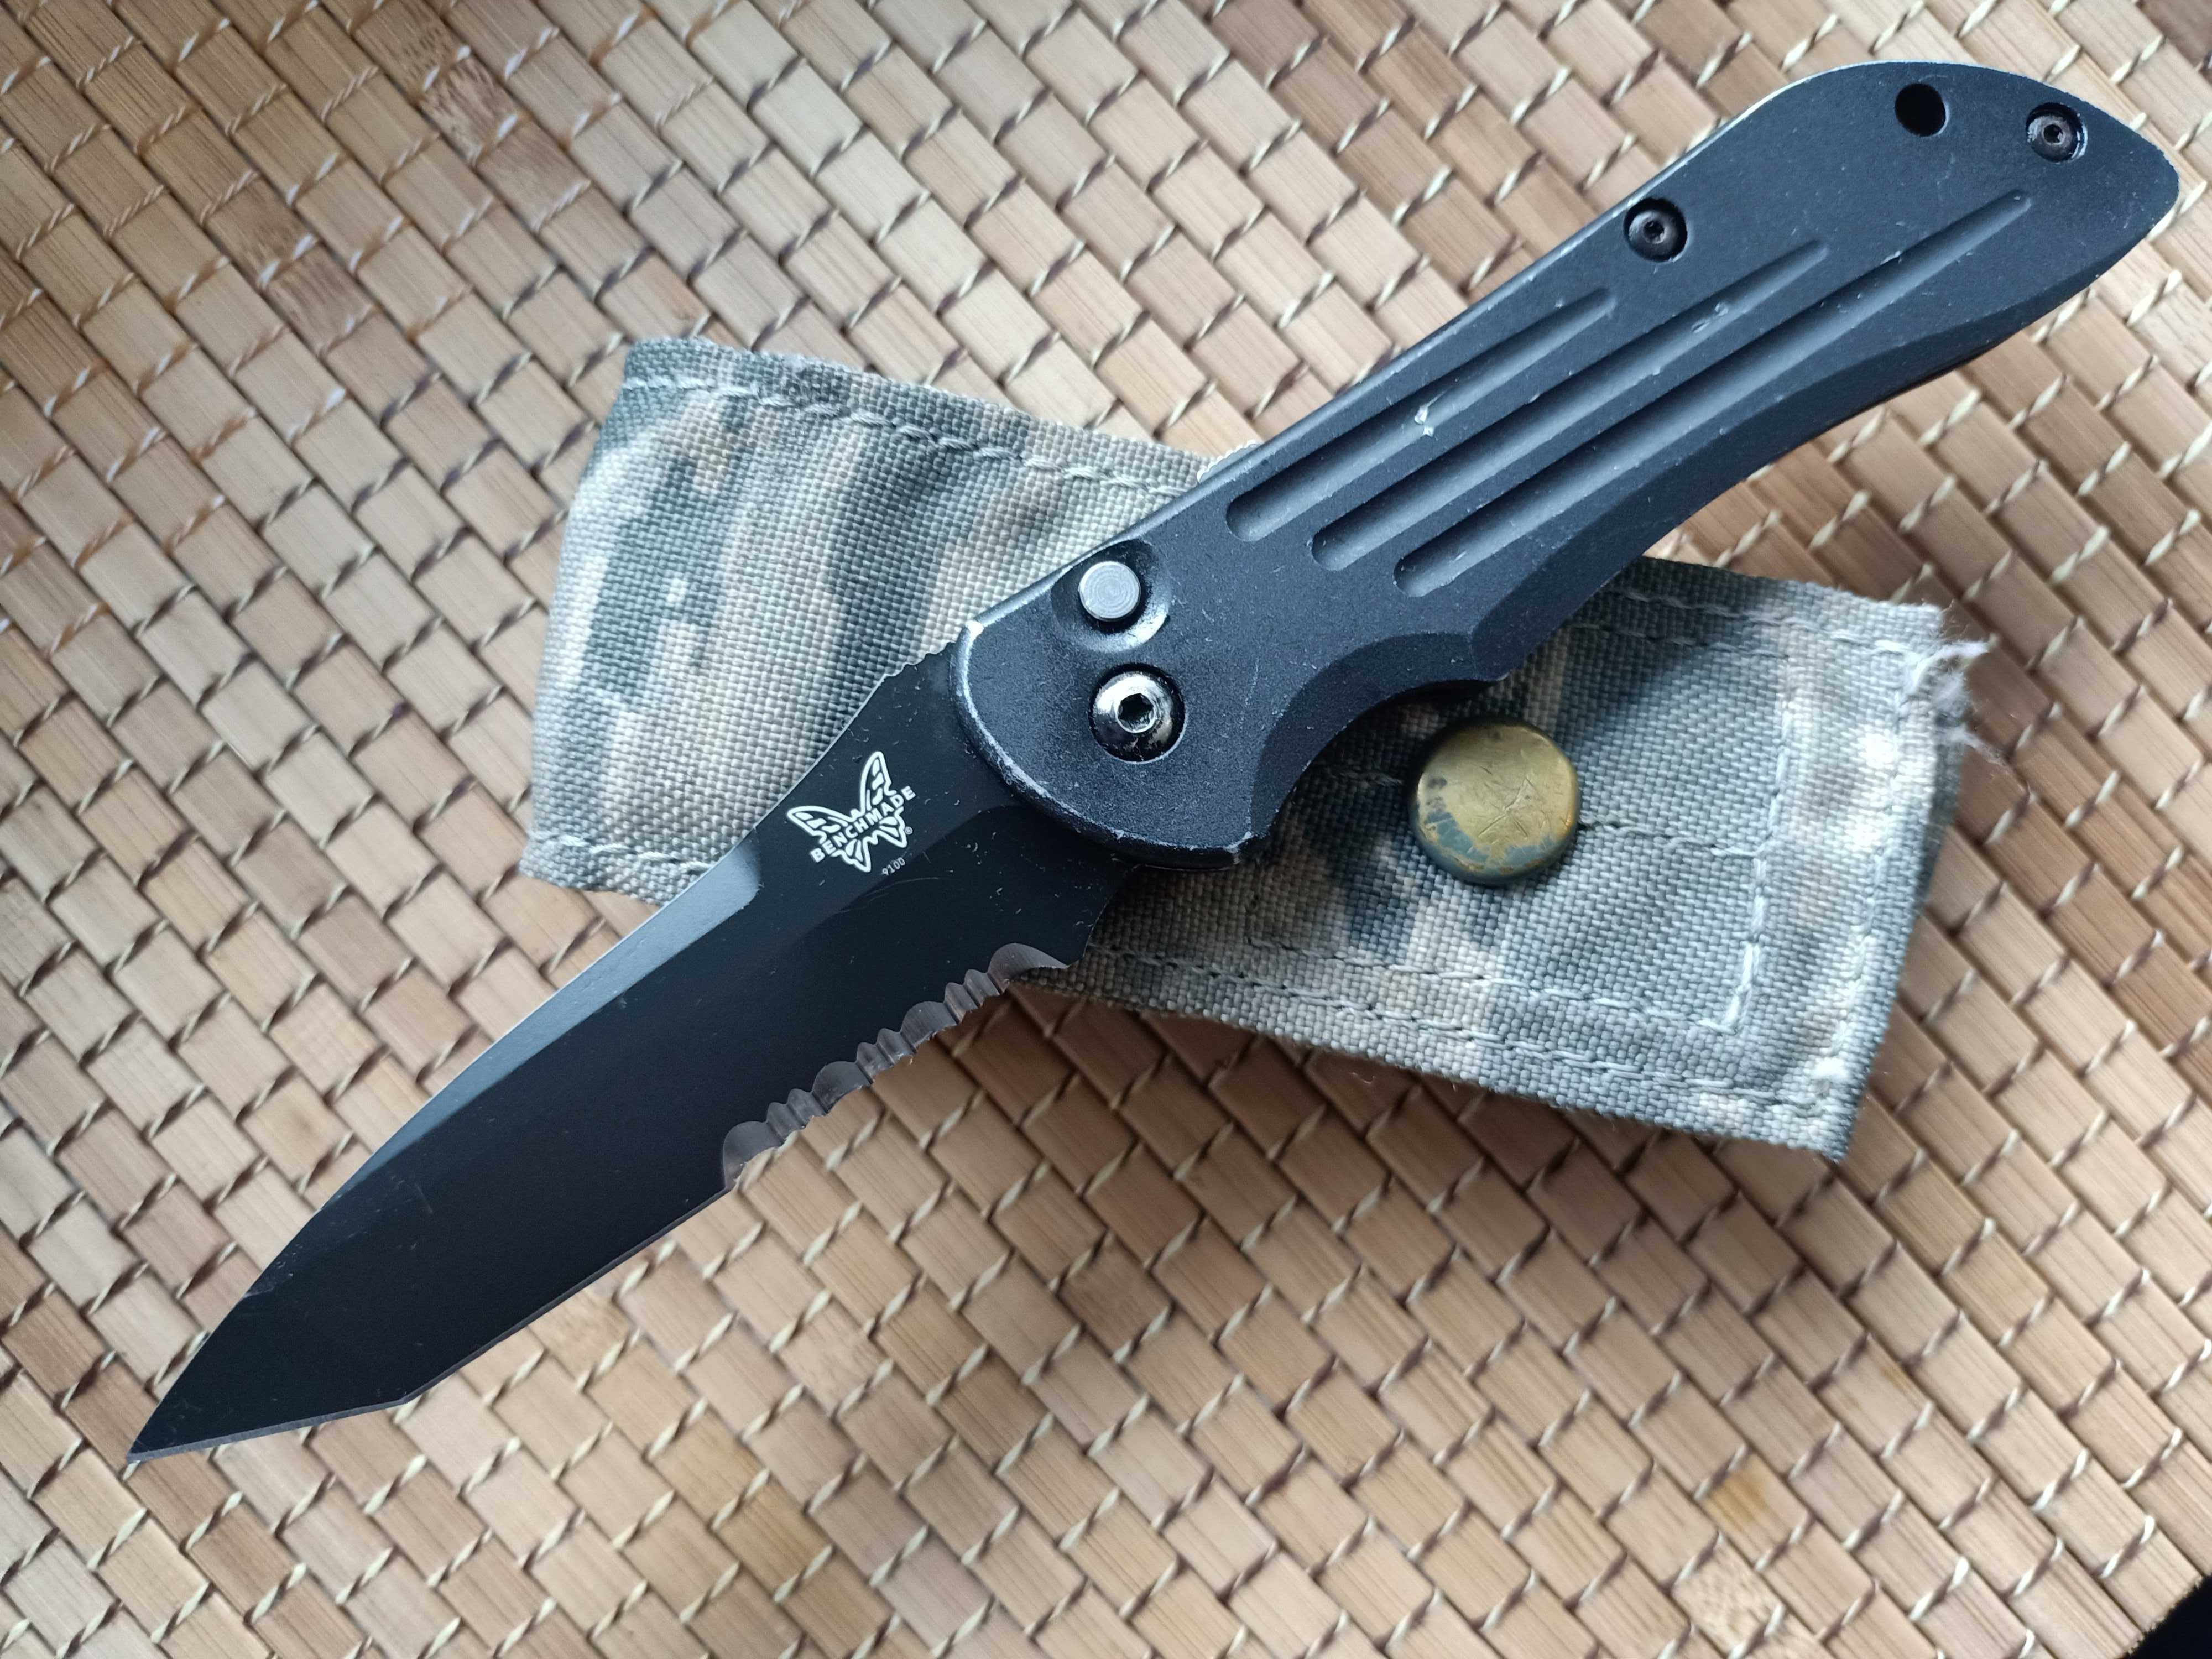 Benchmade 9100 SBT Auto Strykrer